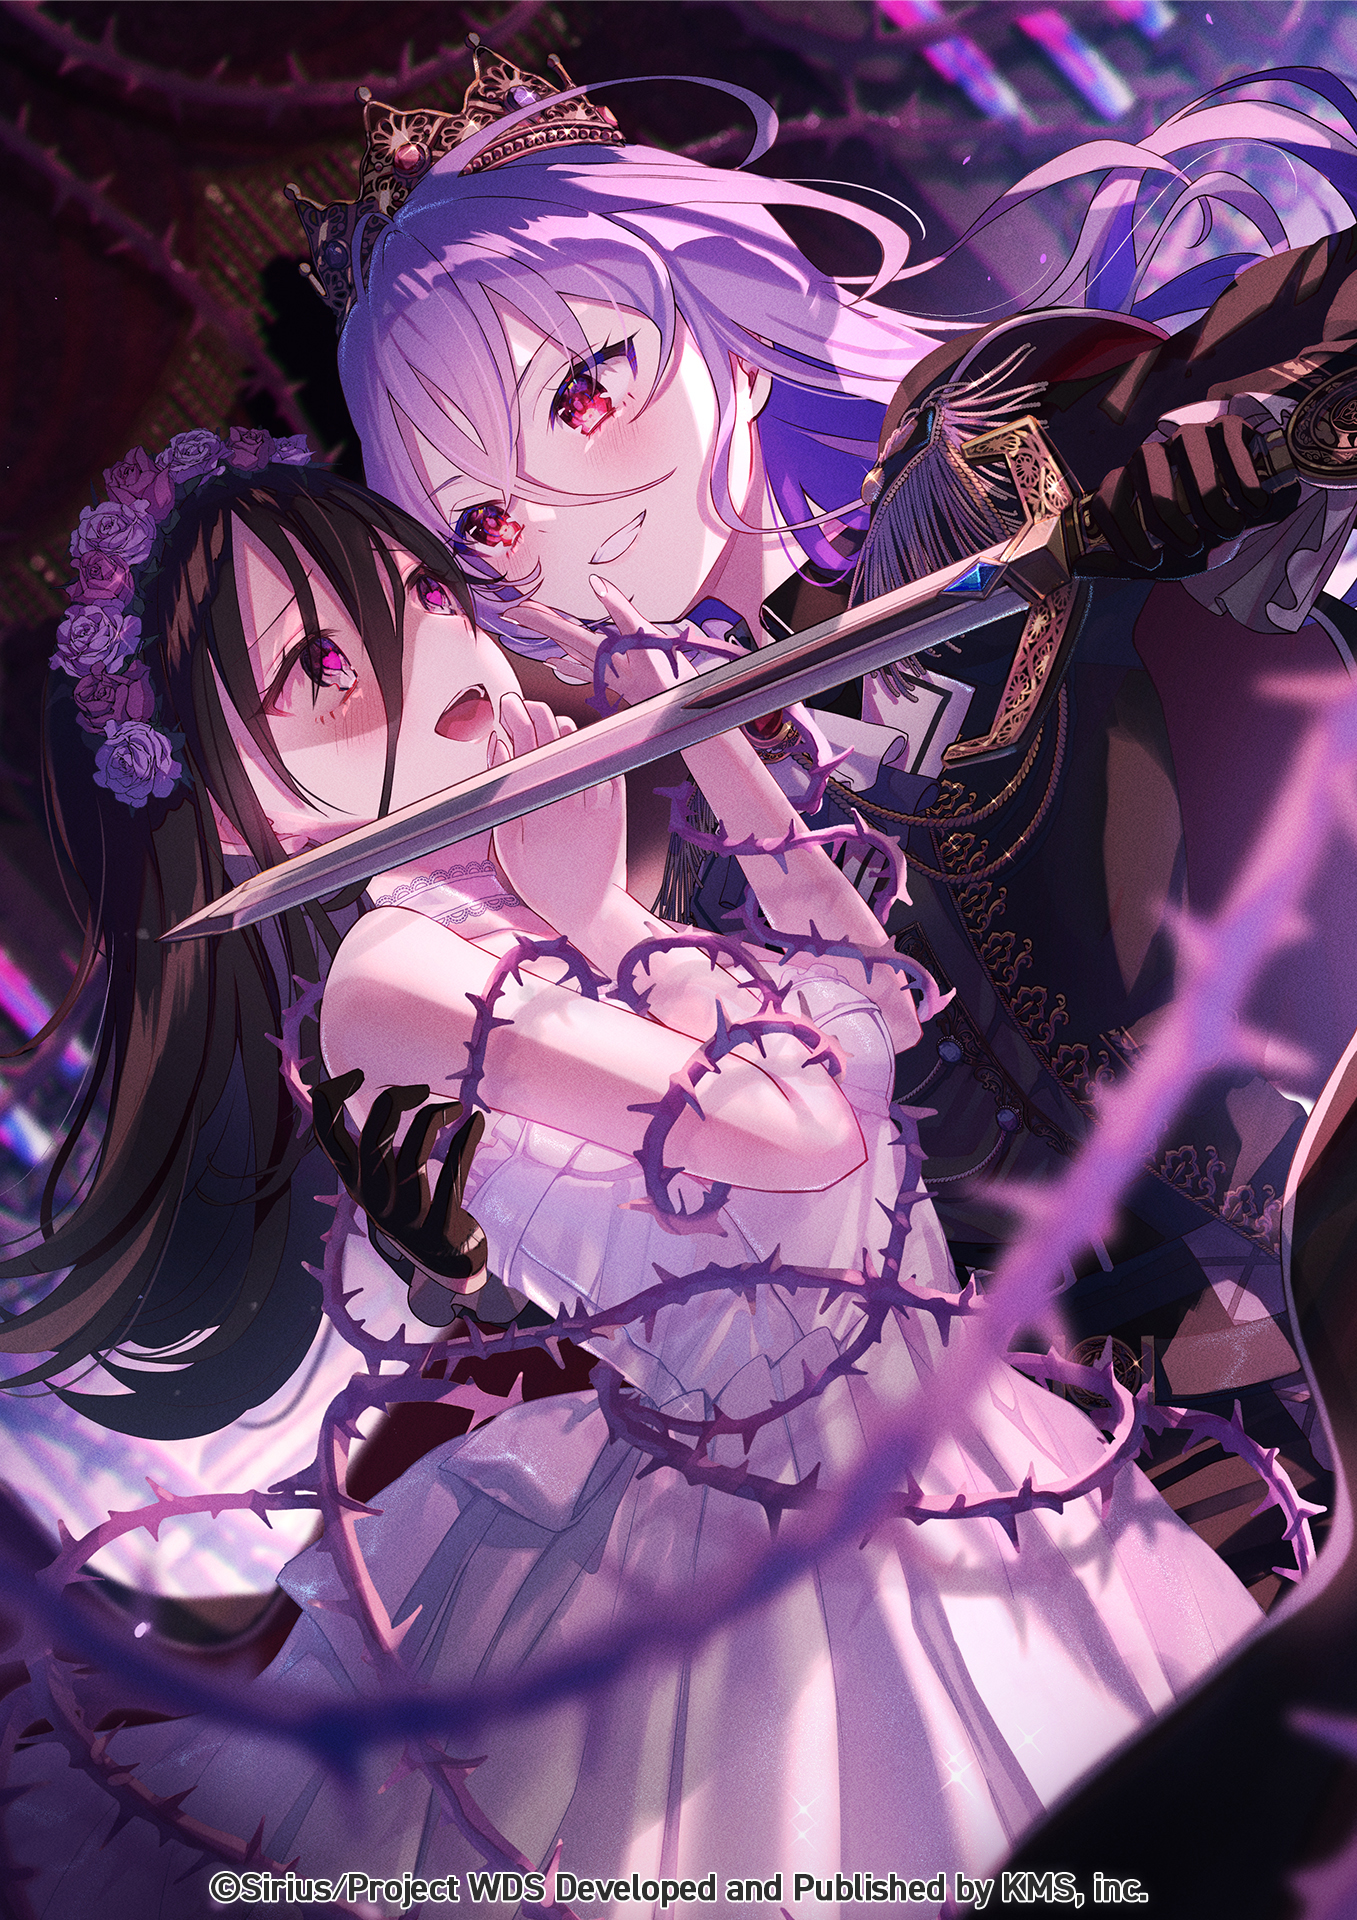 Anime 1357x1920 anime anime girls portrait display sword watermarked weapon long hair vines smiling blushing heart eyes crown dress gloves flower crown uniform hand on face